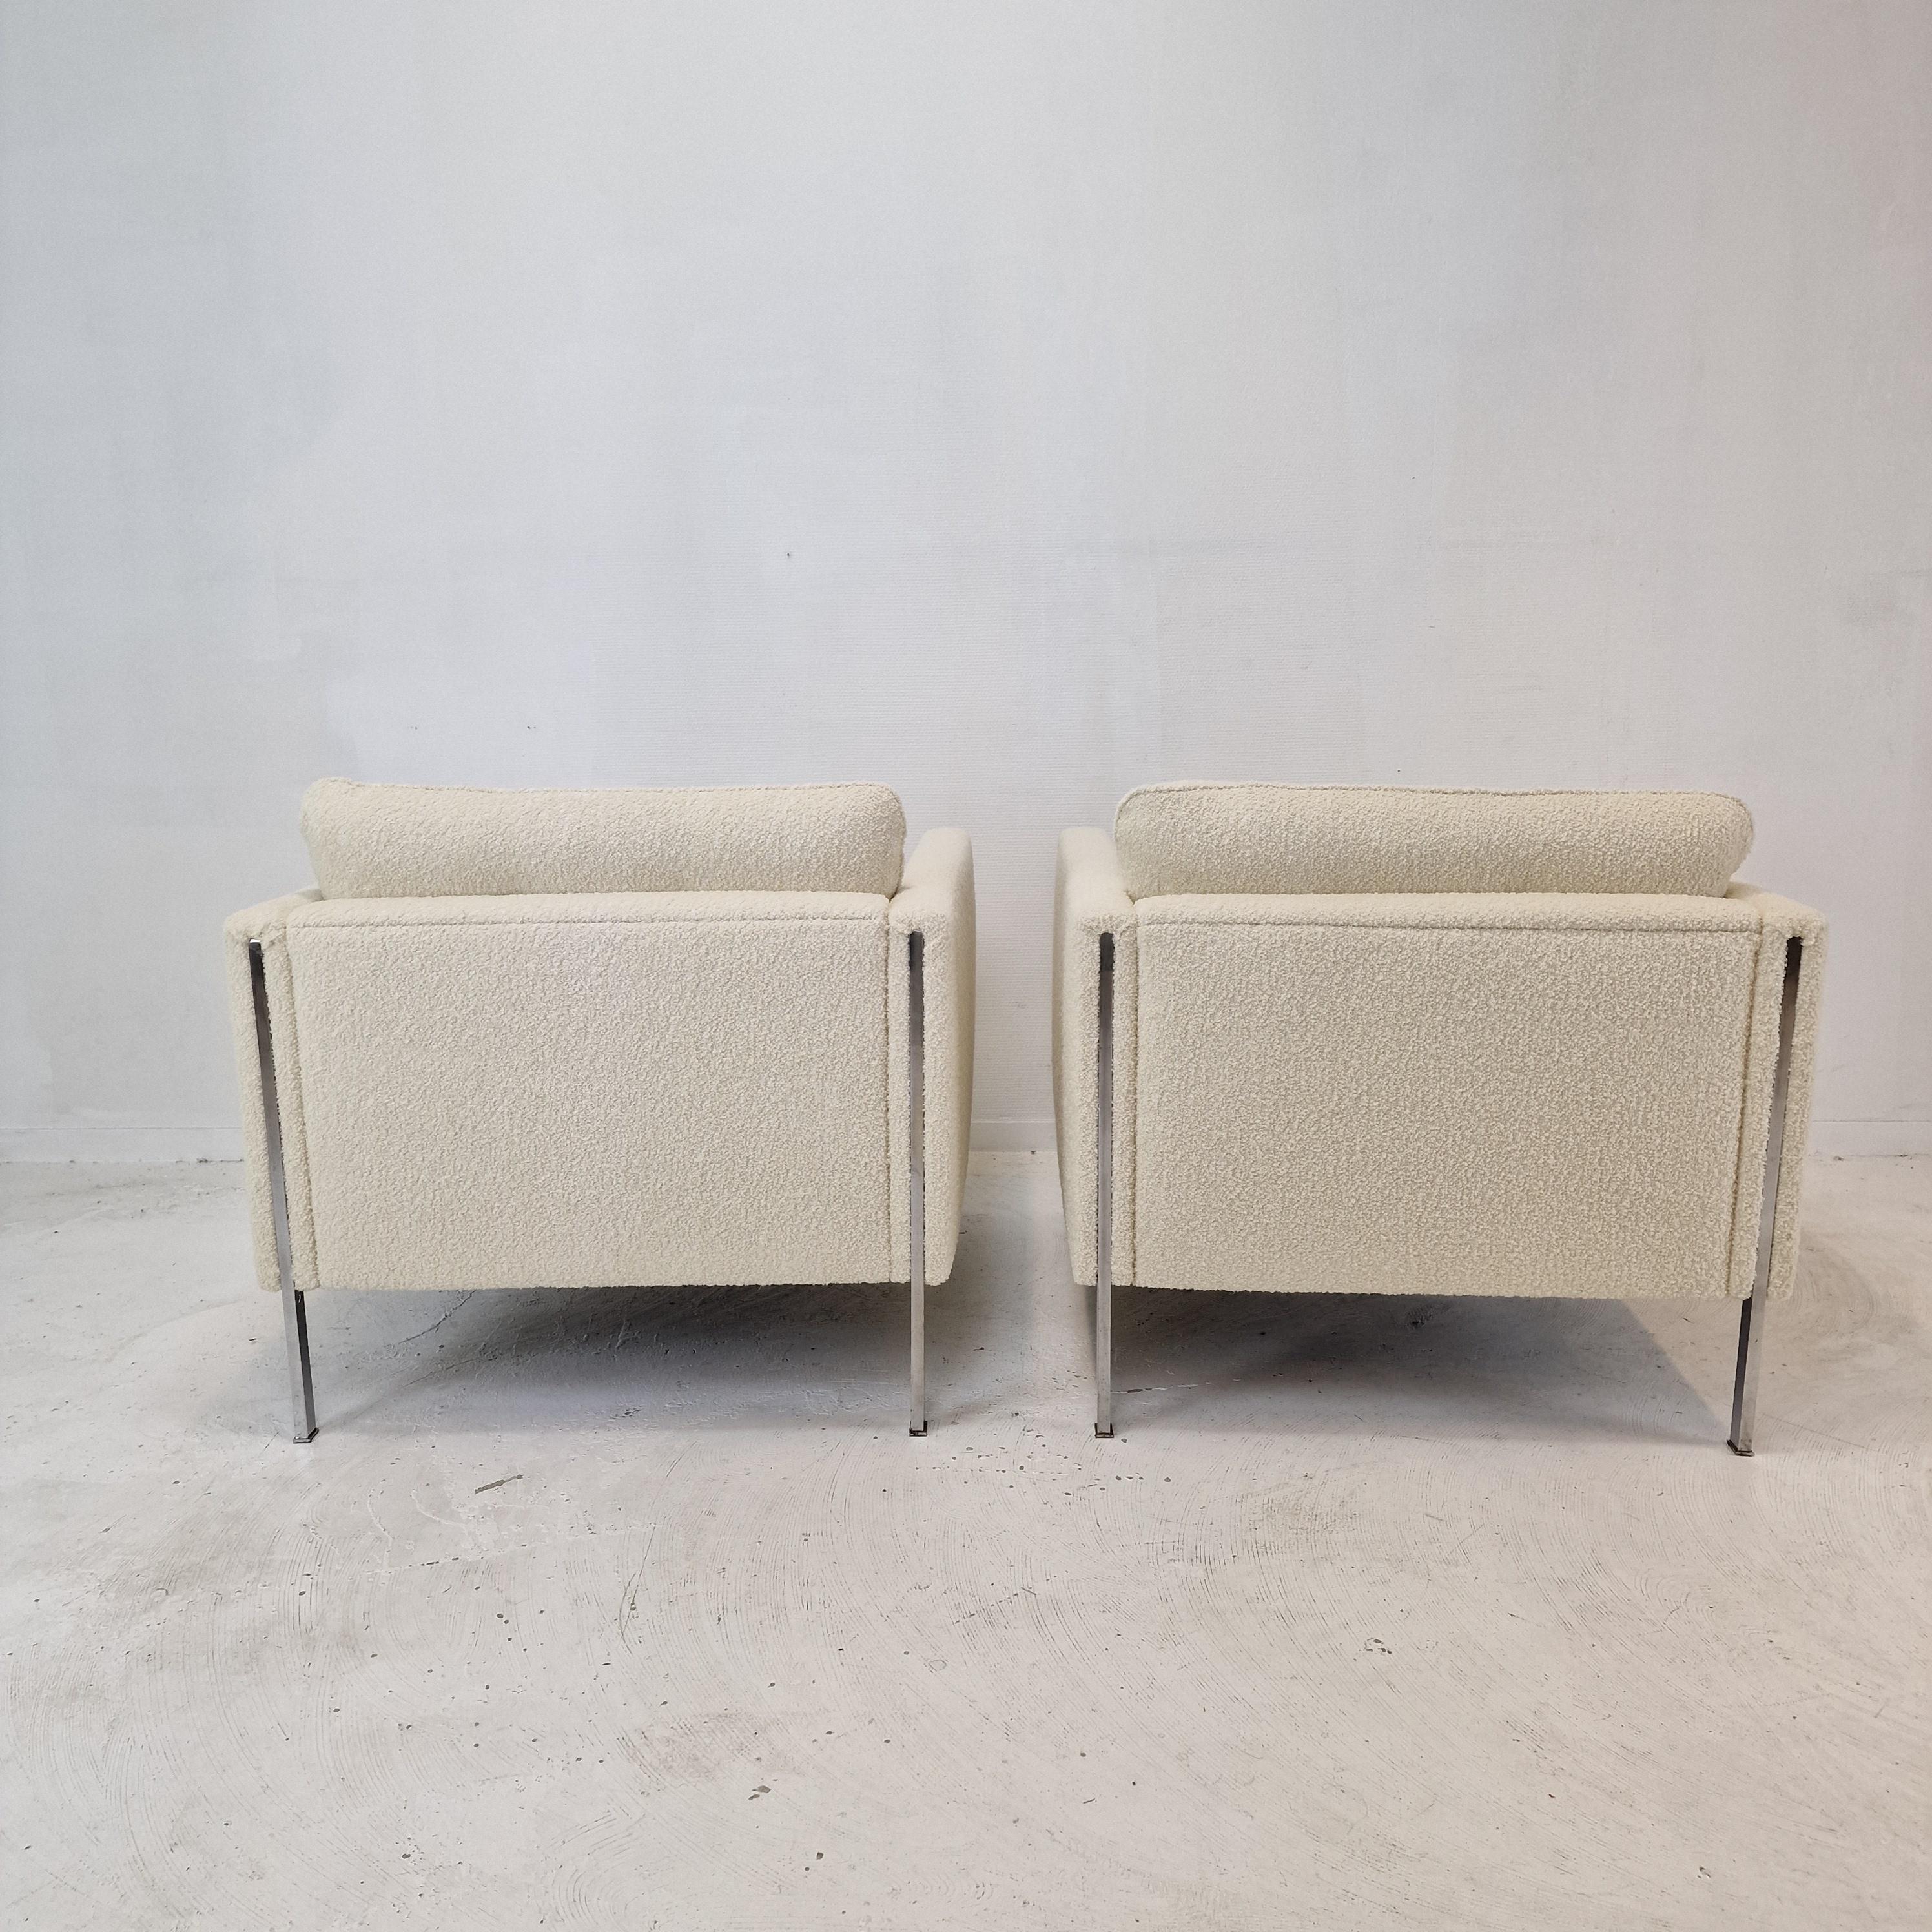 Midcentury Set of 2 Model 442 Chairs by Pierre Paulin for Artifort, 1960s For Sale 6